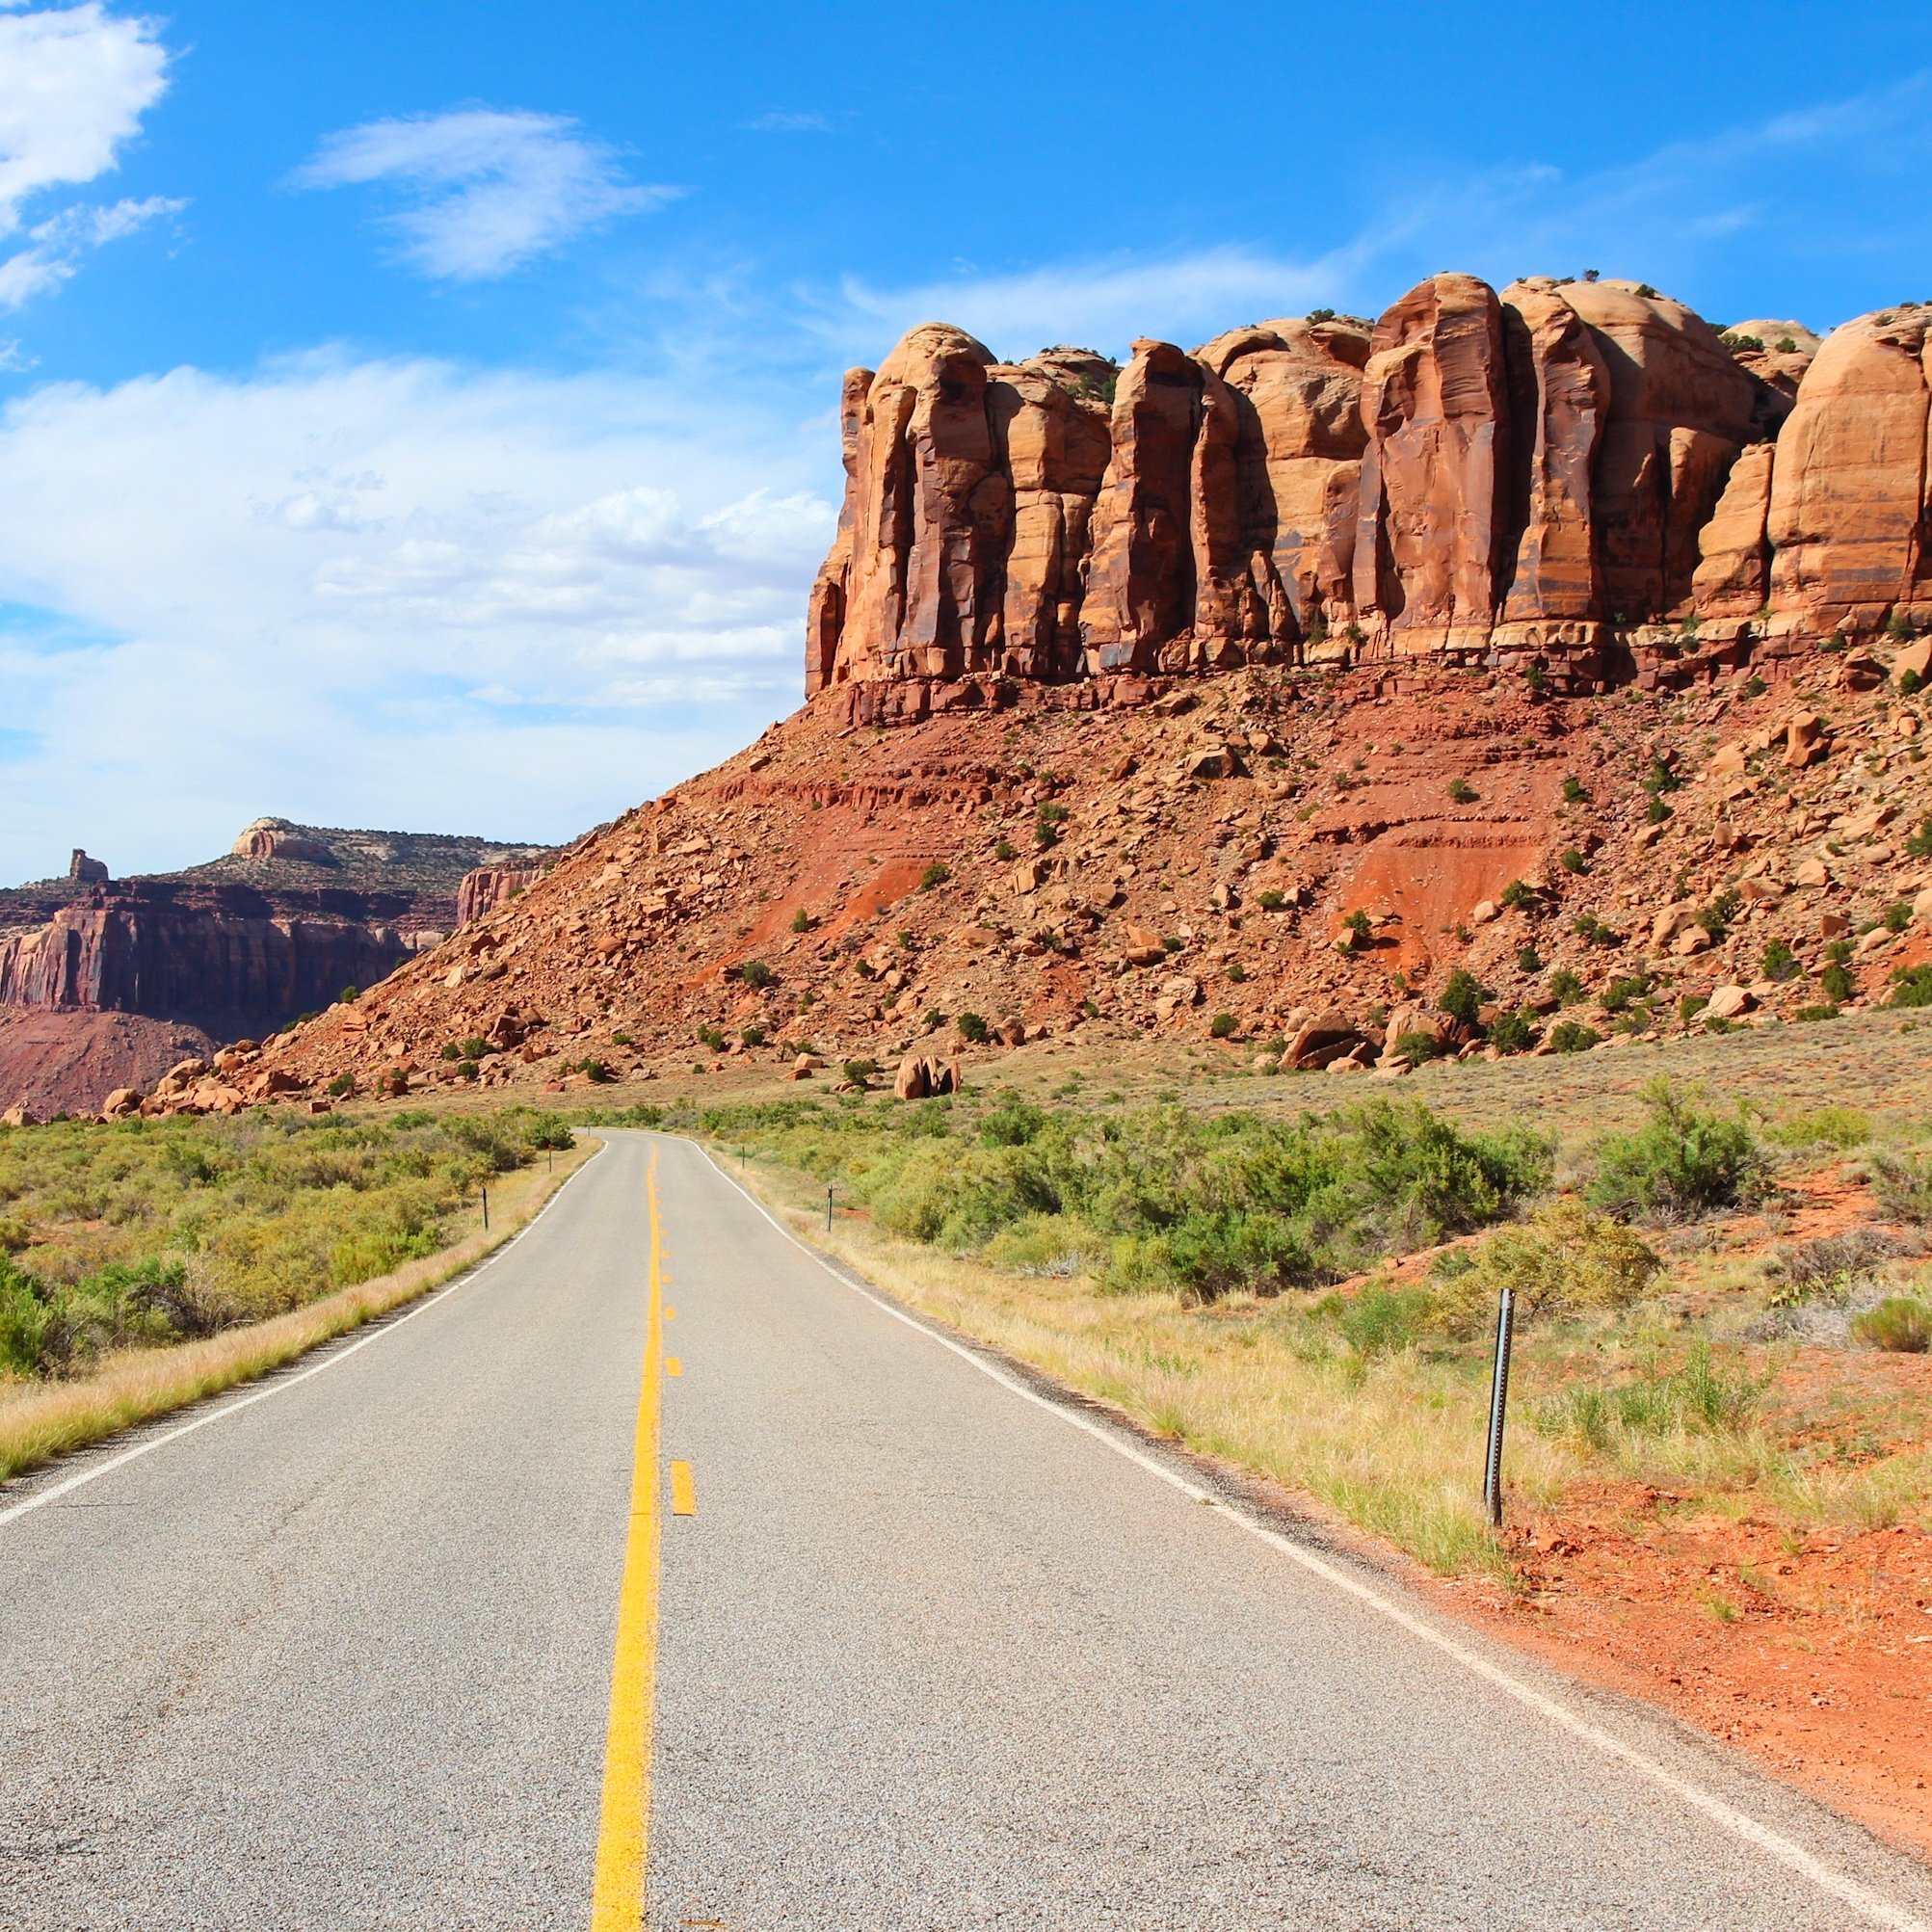 How To Plan A Trip To Utah’s National Parks | TravelAwaits